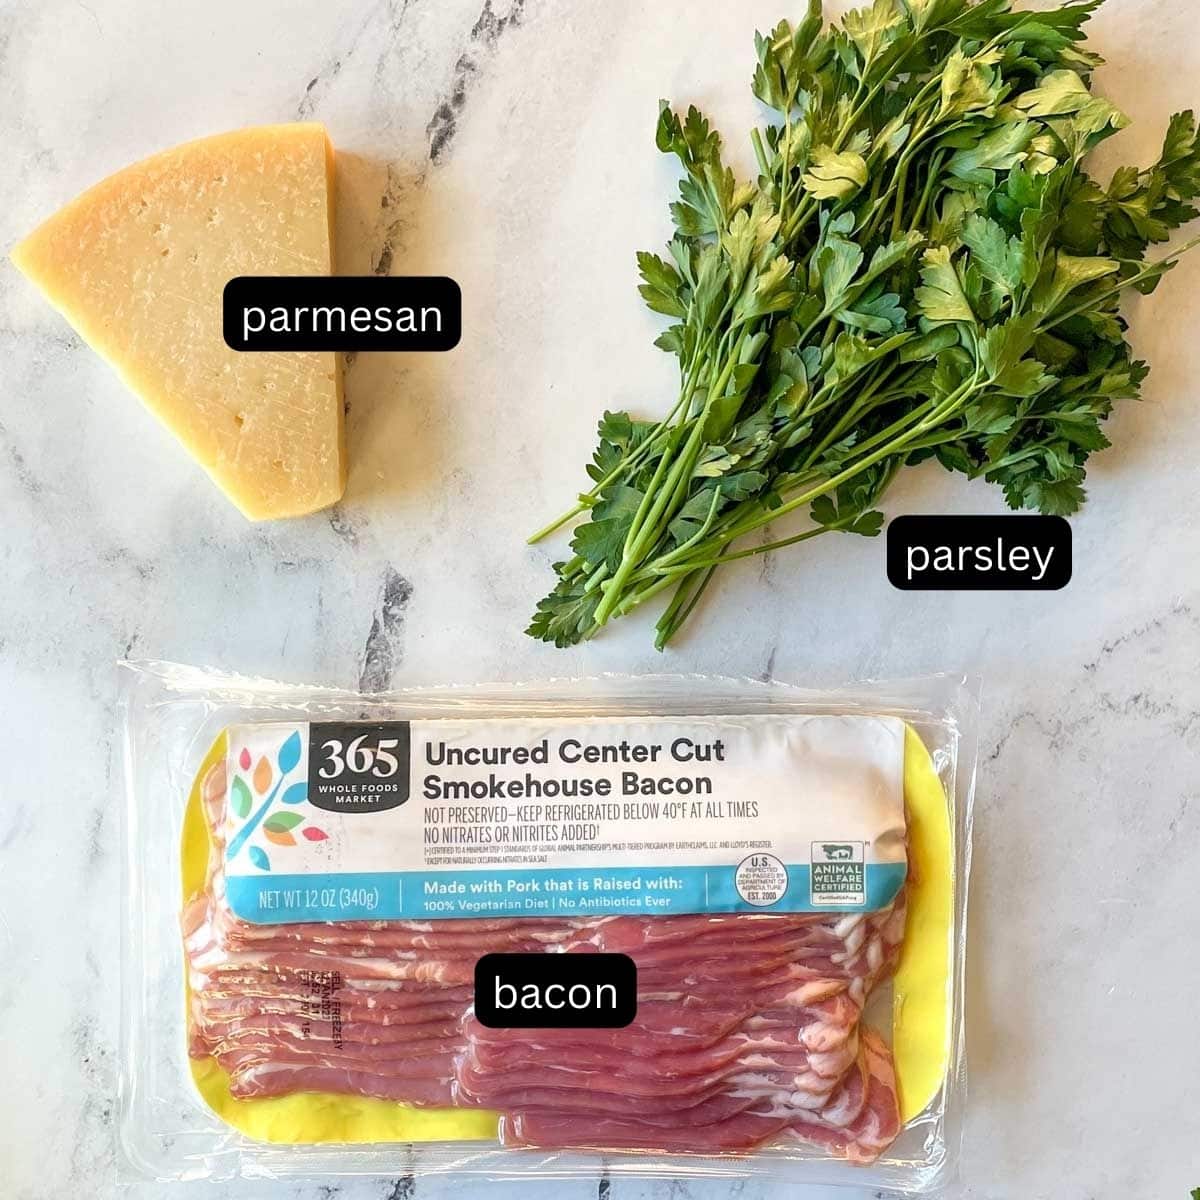 Parmesan, fresh parsley, and bacon are shown on a white marble counter.